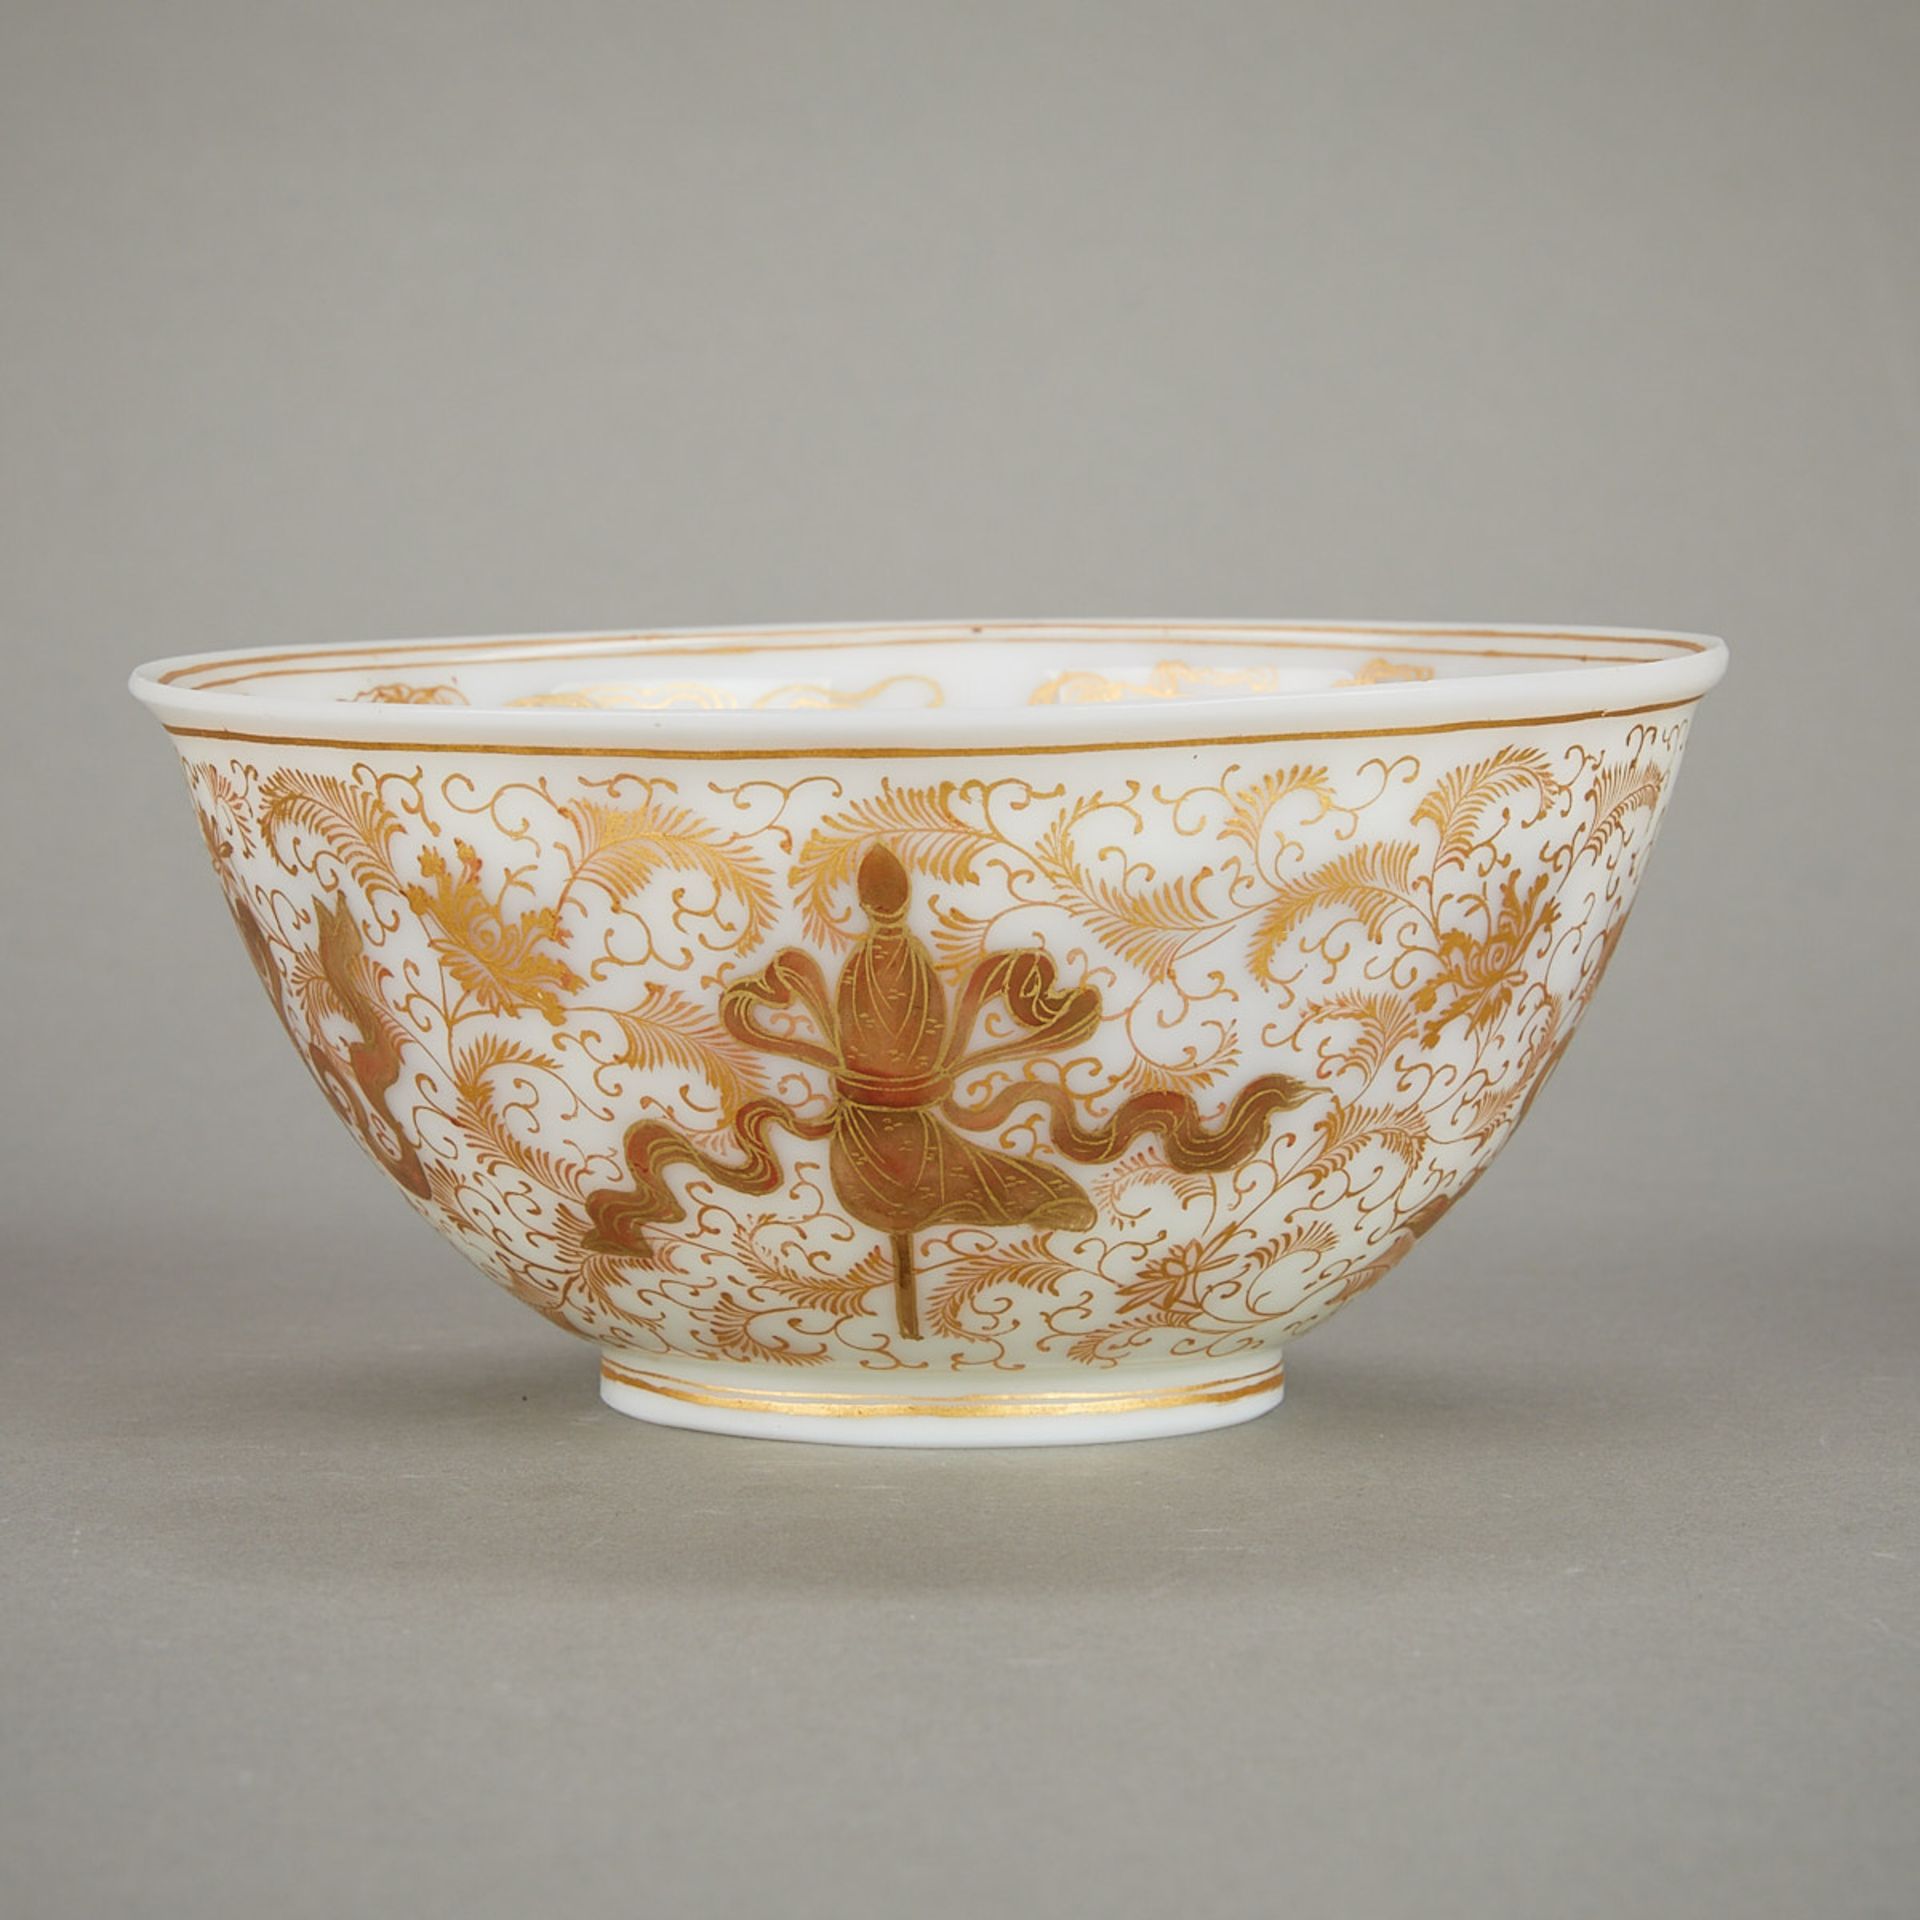 Rare Chinese Gilt Semi-Opaque White Glass Bowl - Image 5 of 16